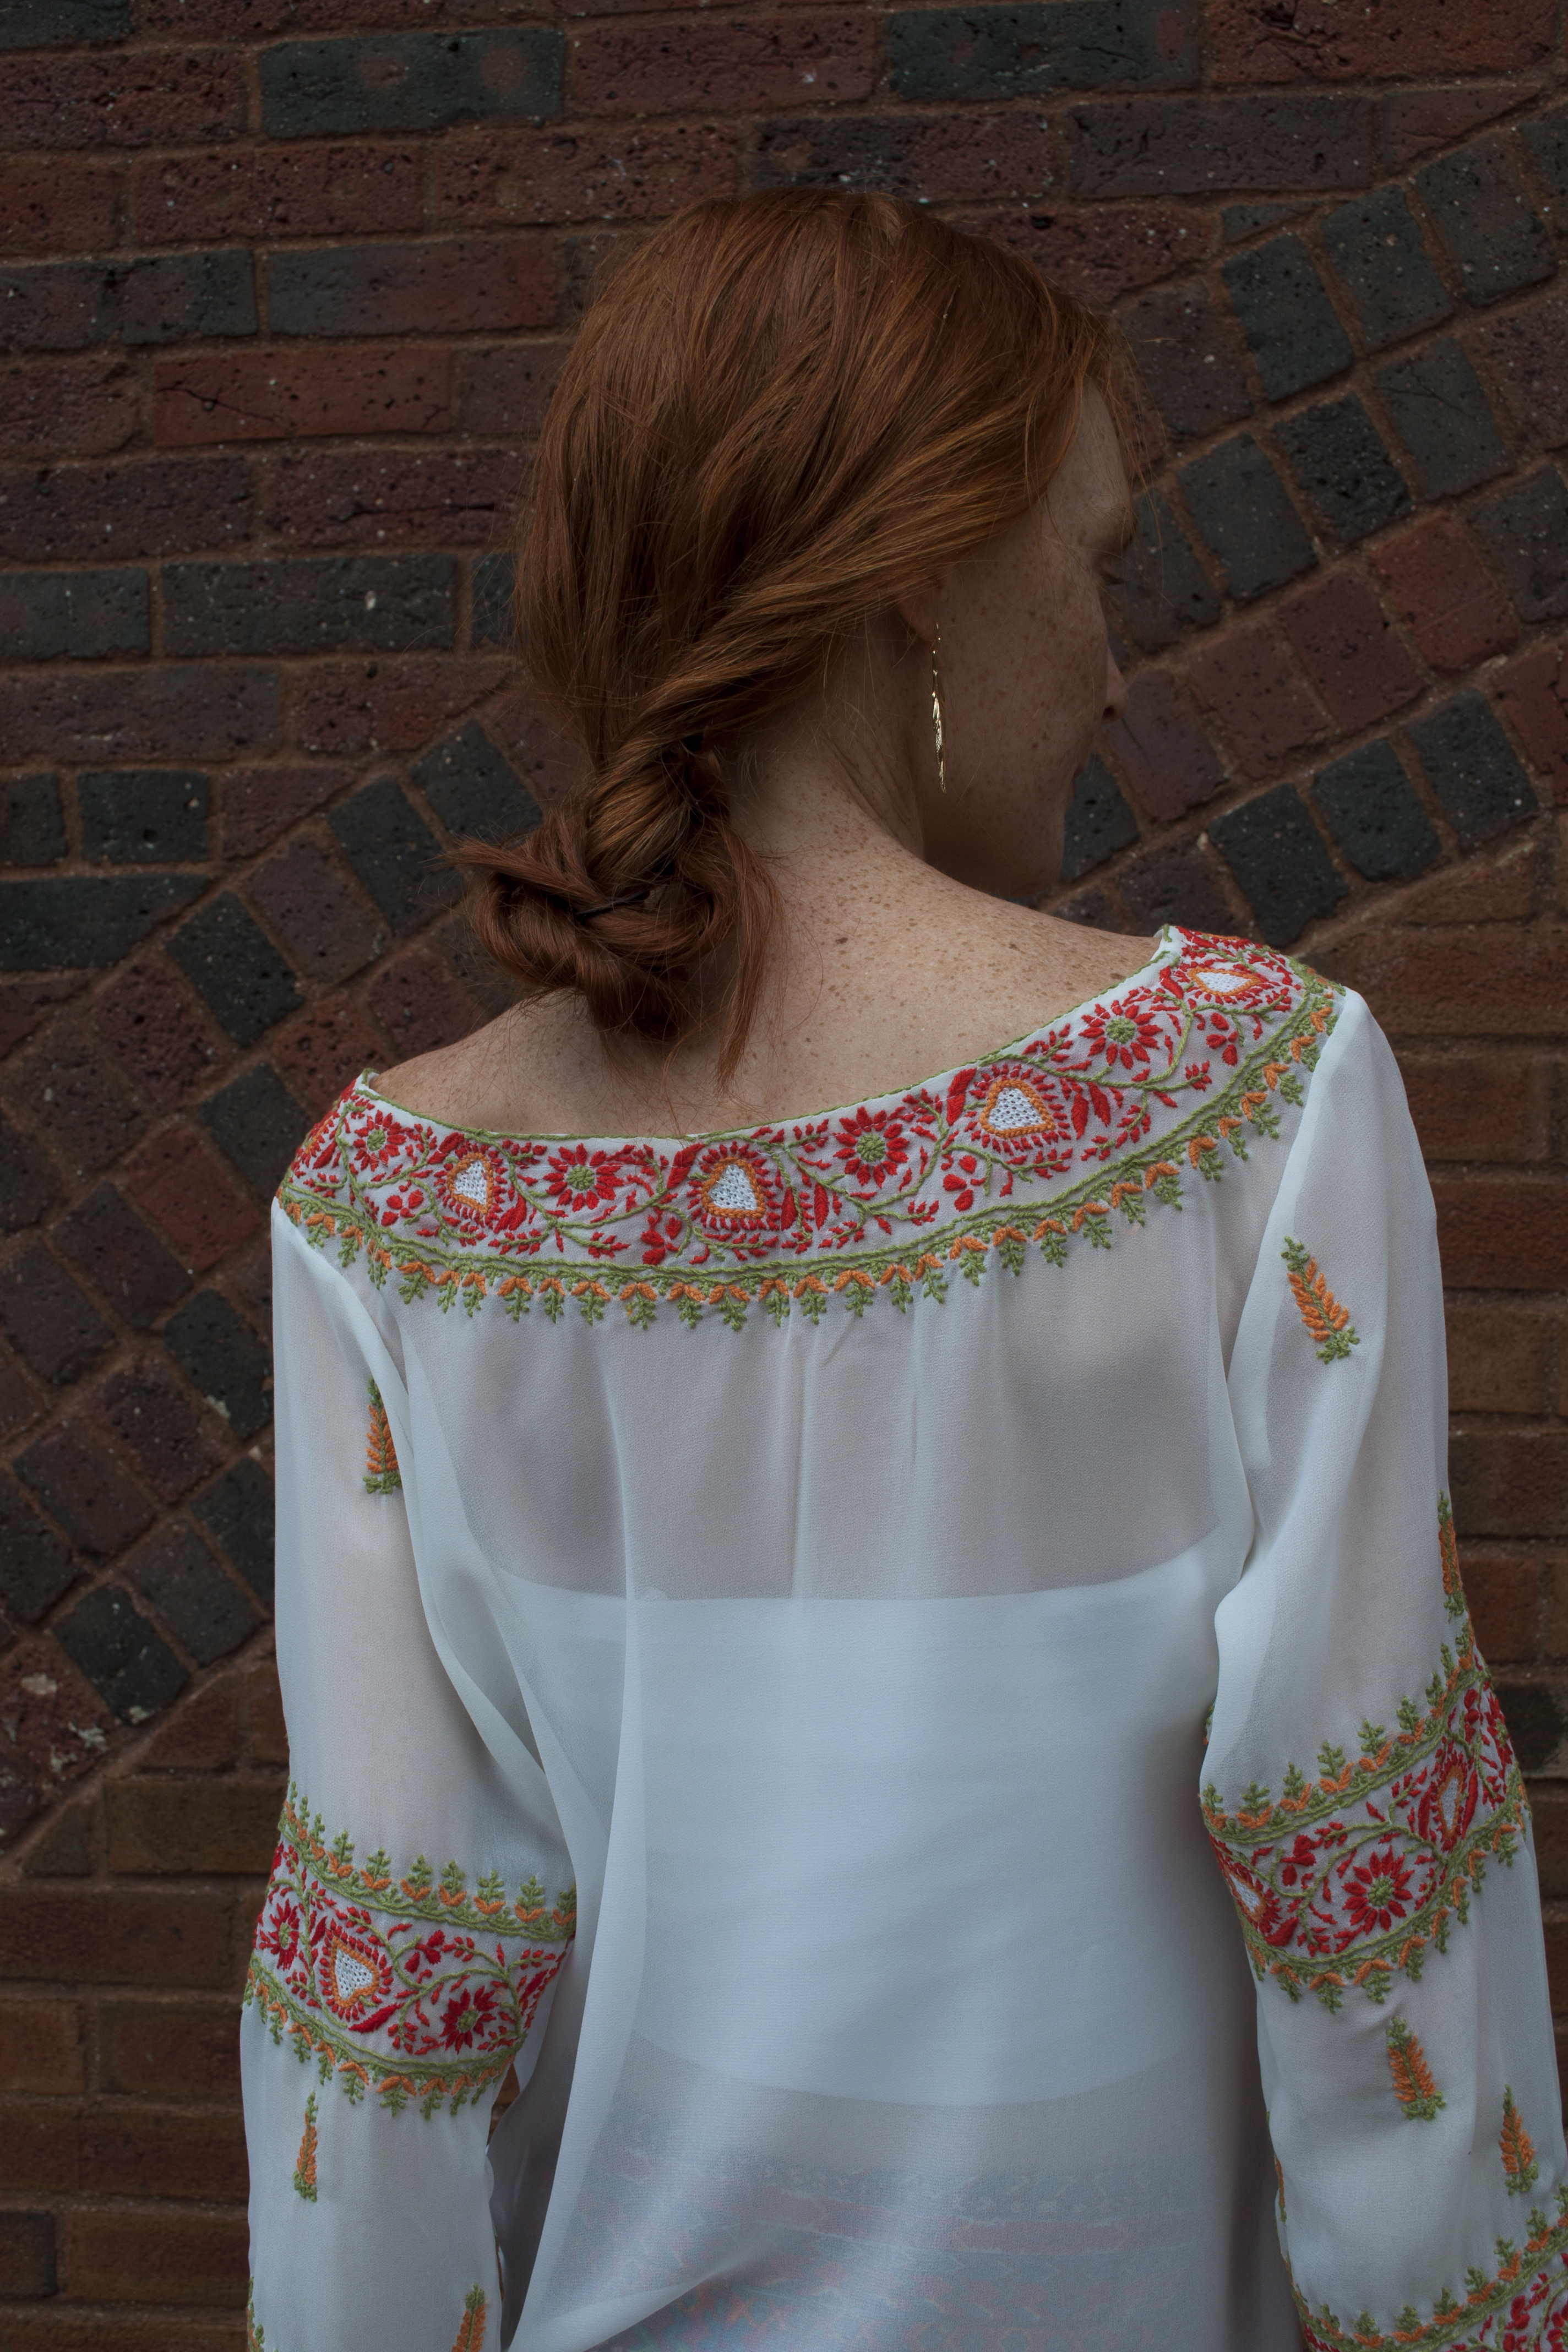 loose updo red hair wearing sheer lace blouse